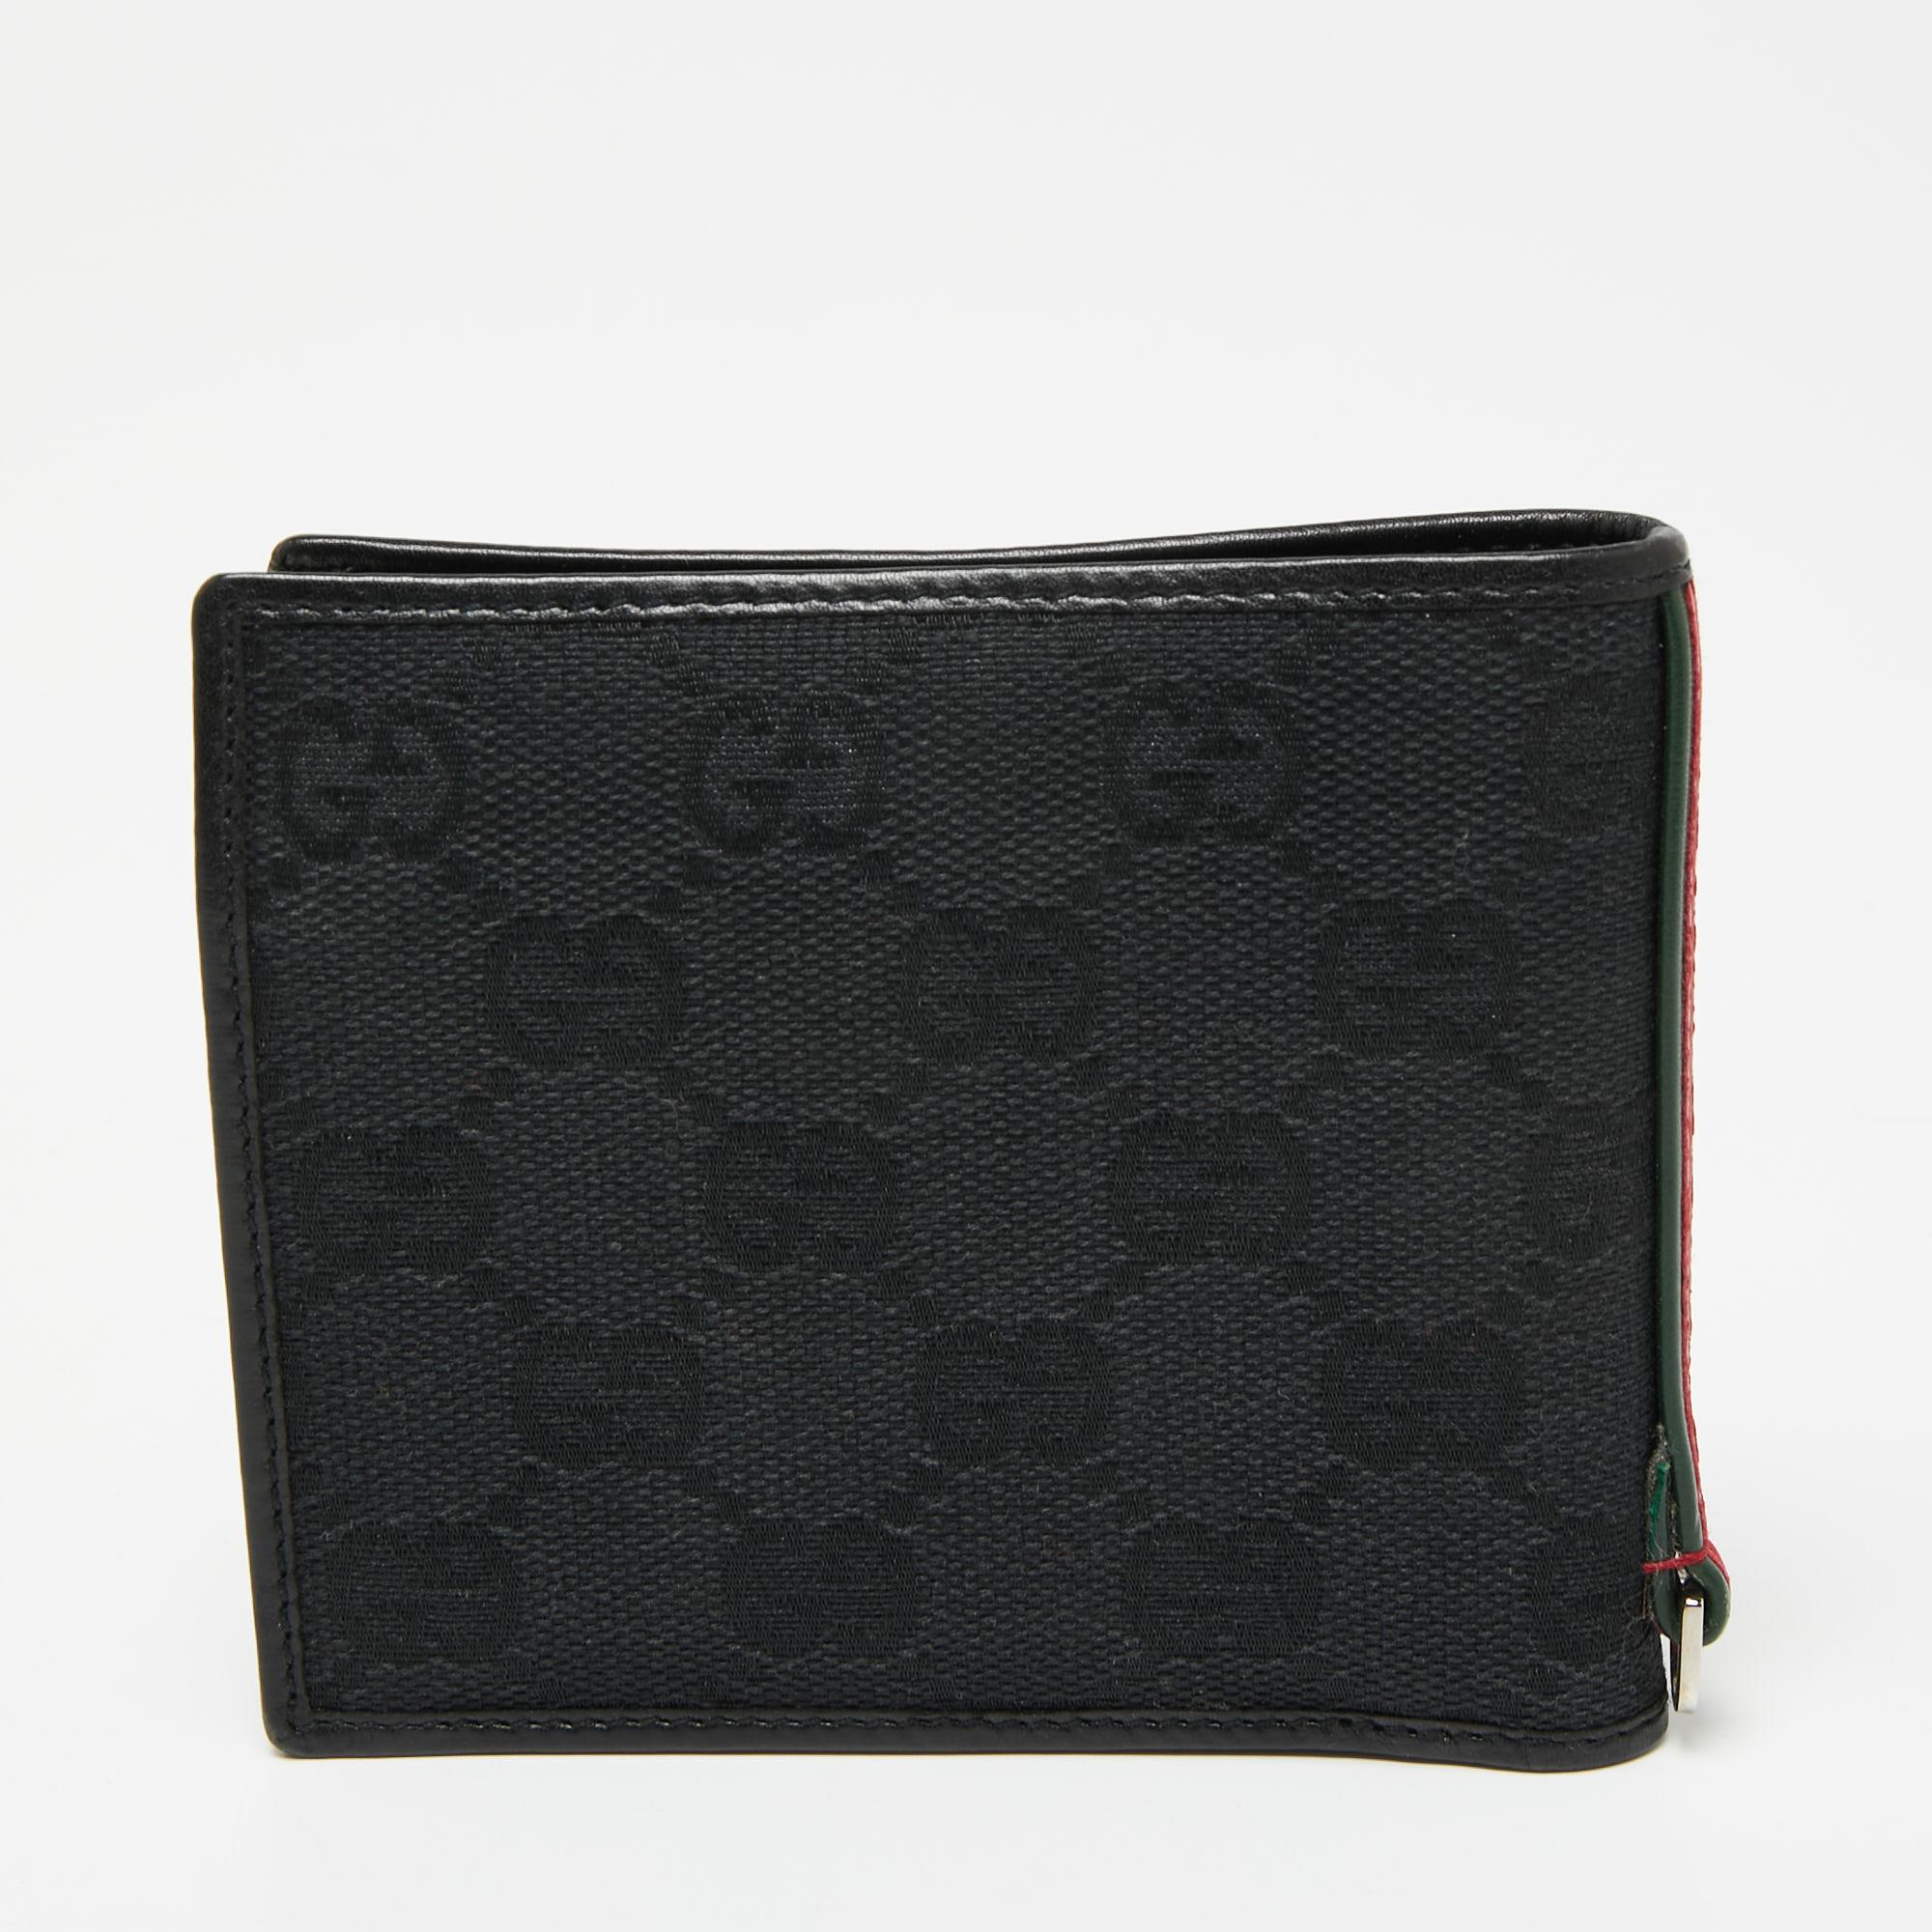 This accessory from Gucci brings along a touch of luxury and immense style. It comes finely crafted and designed into a bifold. The wallet is equipped with pockets and multiple slots so you can neatly carry your cards and cash.

